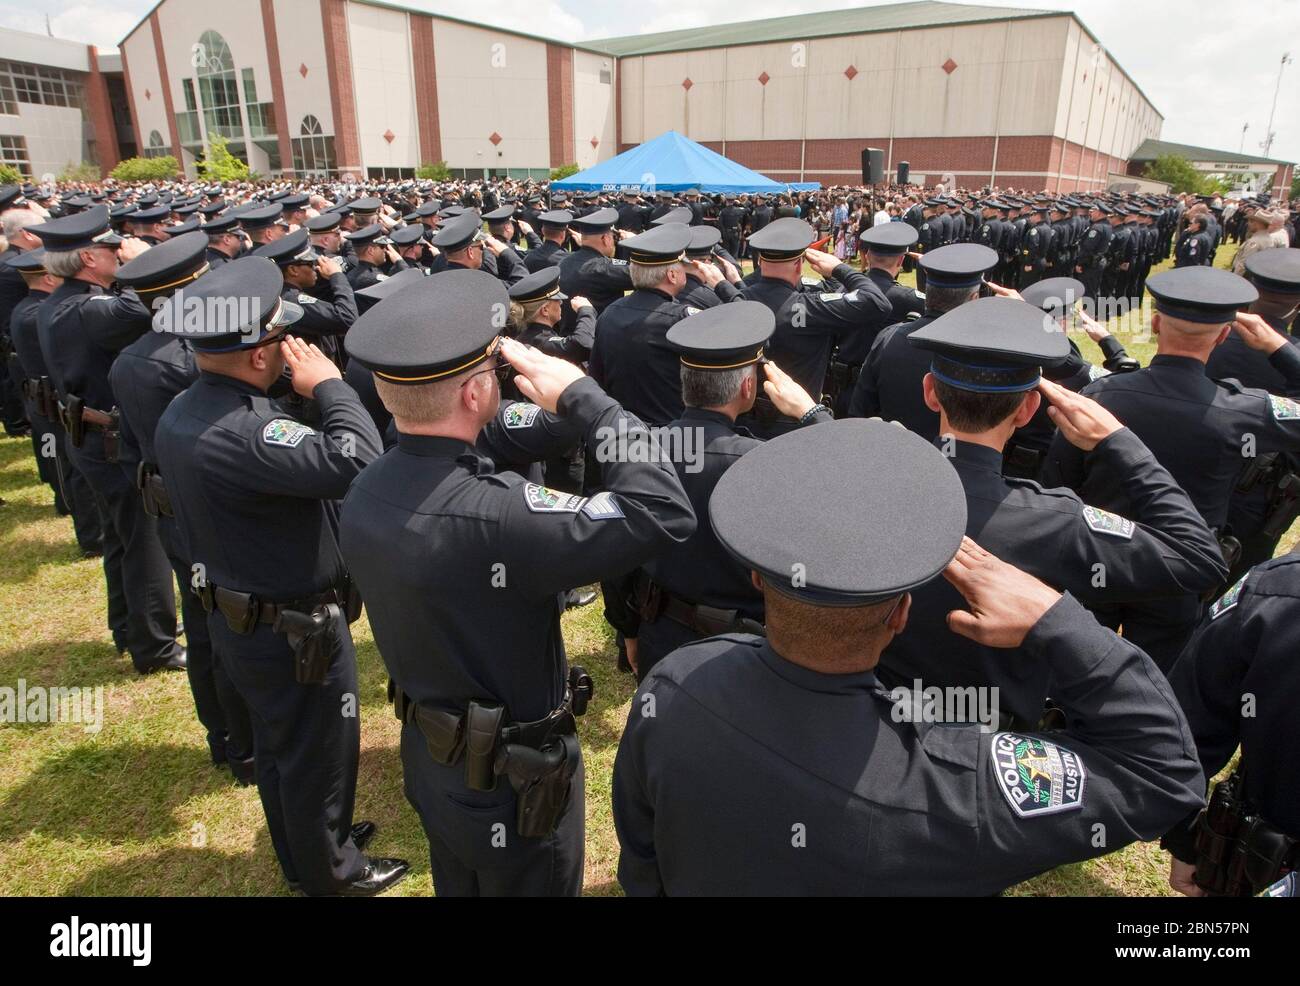 Austin, Texas USA, April 12, 2012: Hundreds of uniformed police officers salute while paying tribune at funeral for slain Austin police officer Jaime Padron, killed in the line of duty.  ©Marjorie Kamys Cotera/Daemmrich Photography Stock Photo